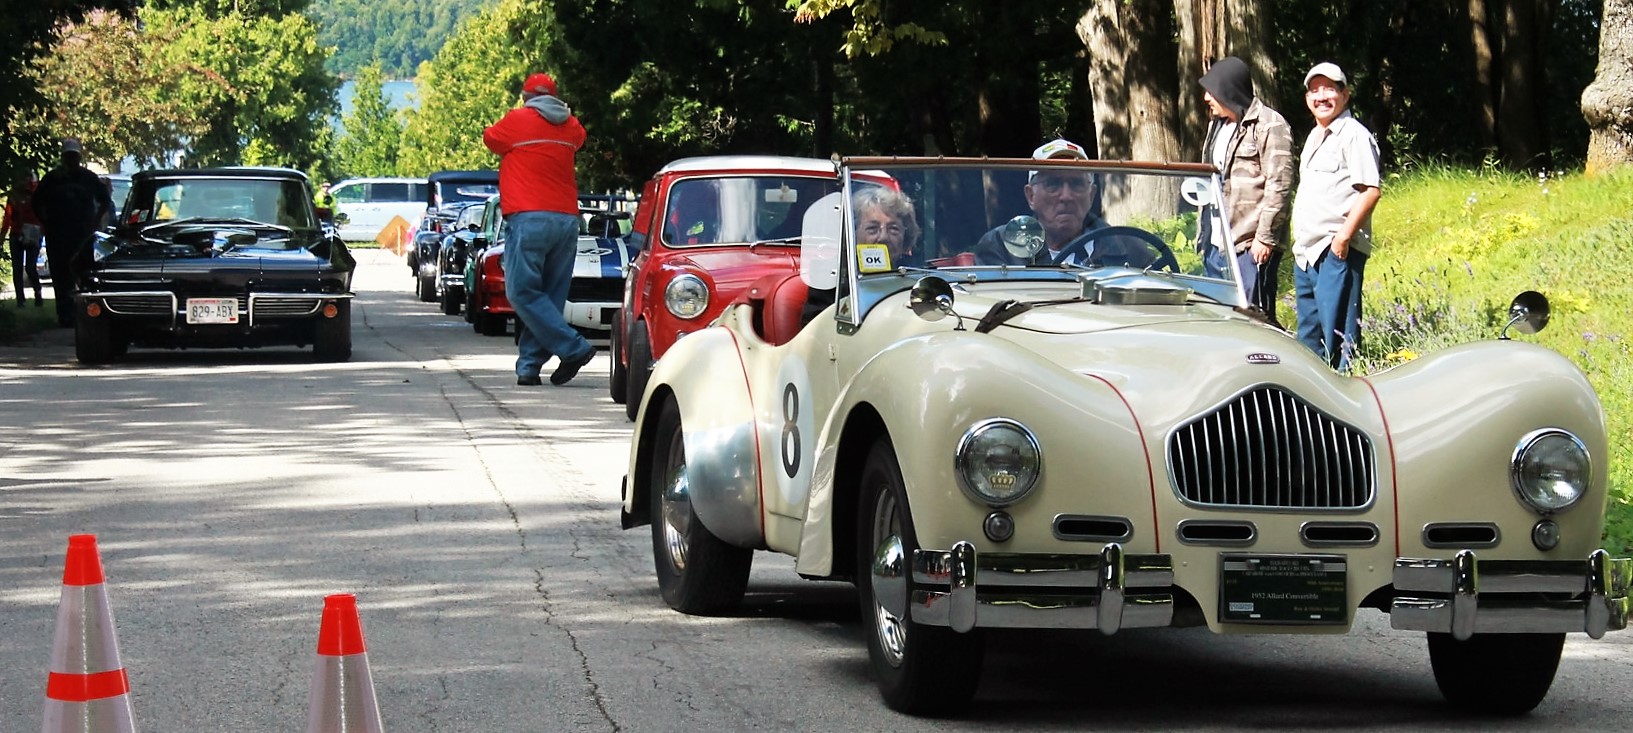 , Ephrain Hillclimb in Wisconsin will race to the top for second year, ClassicCars.com Journal